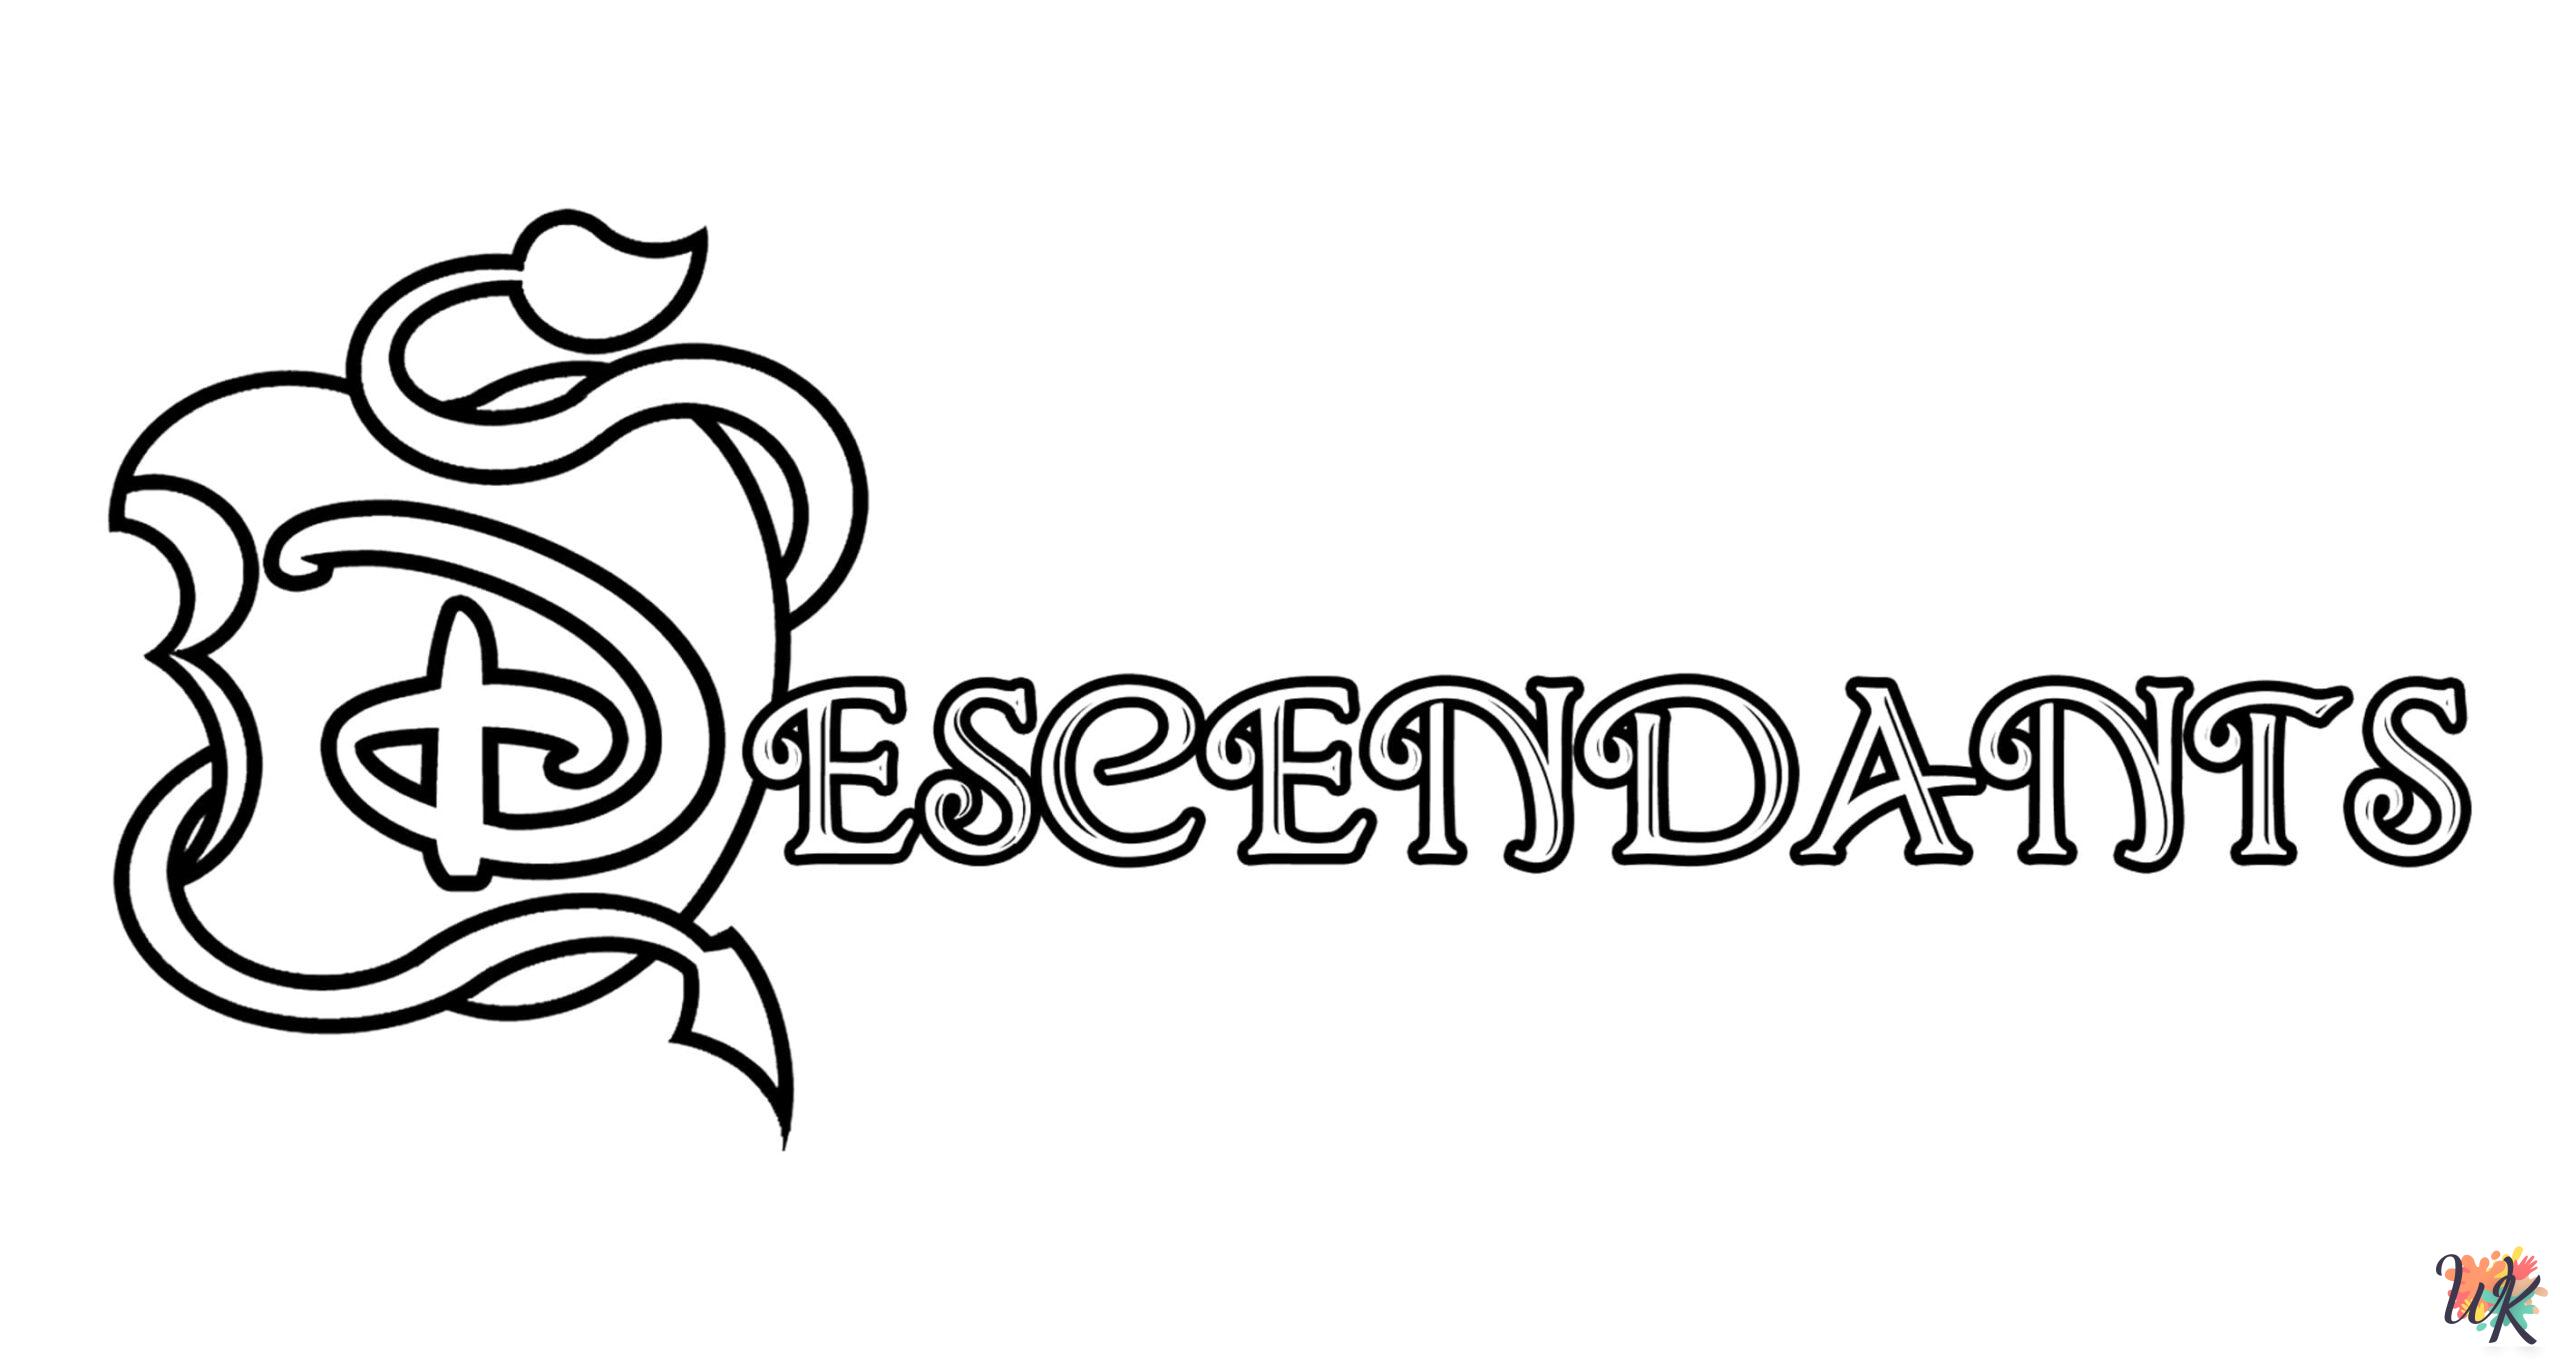 Descendants 2 coloring pages for adults